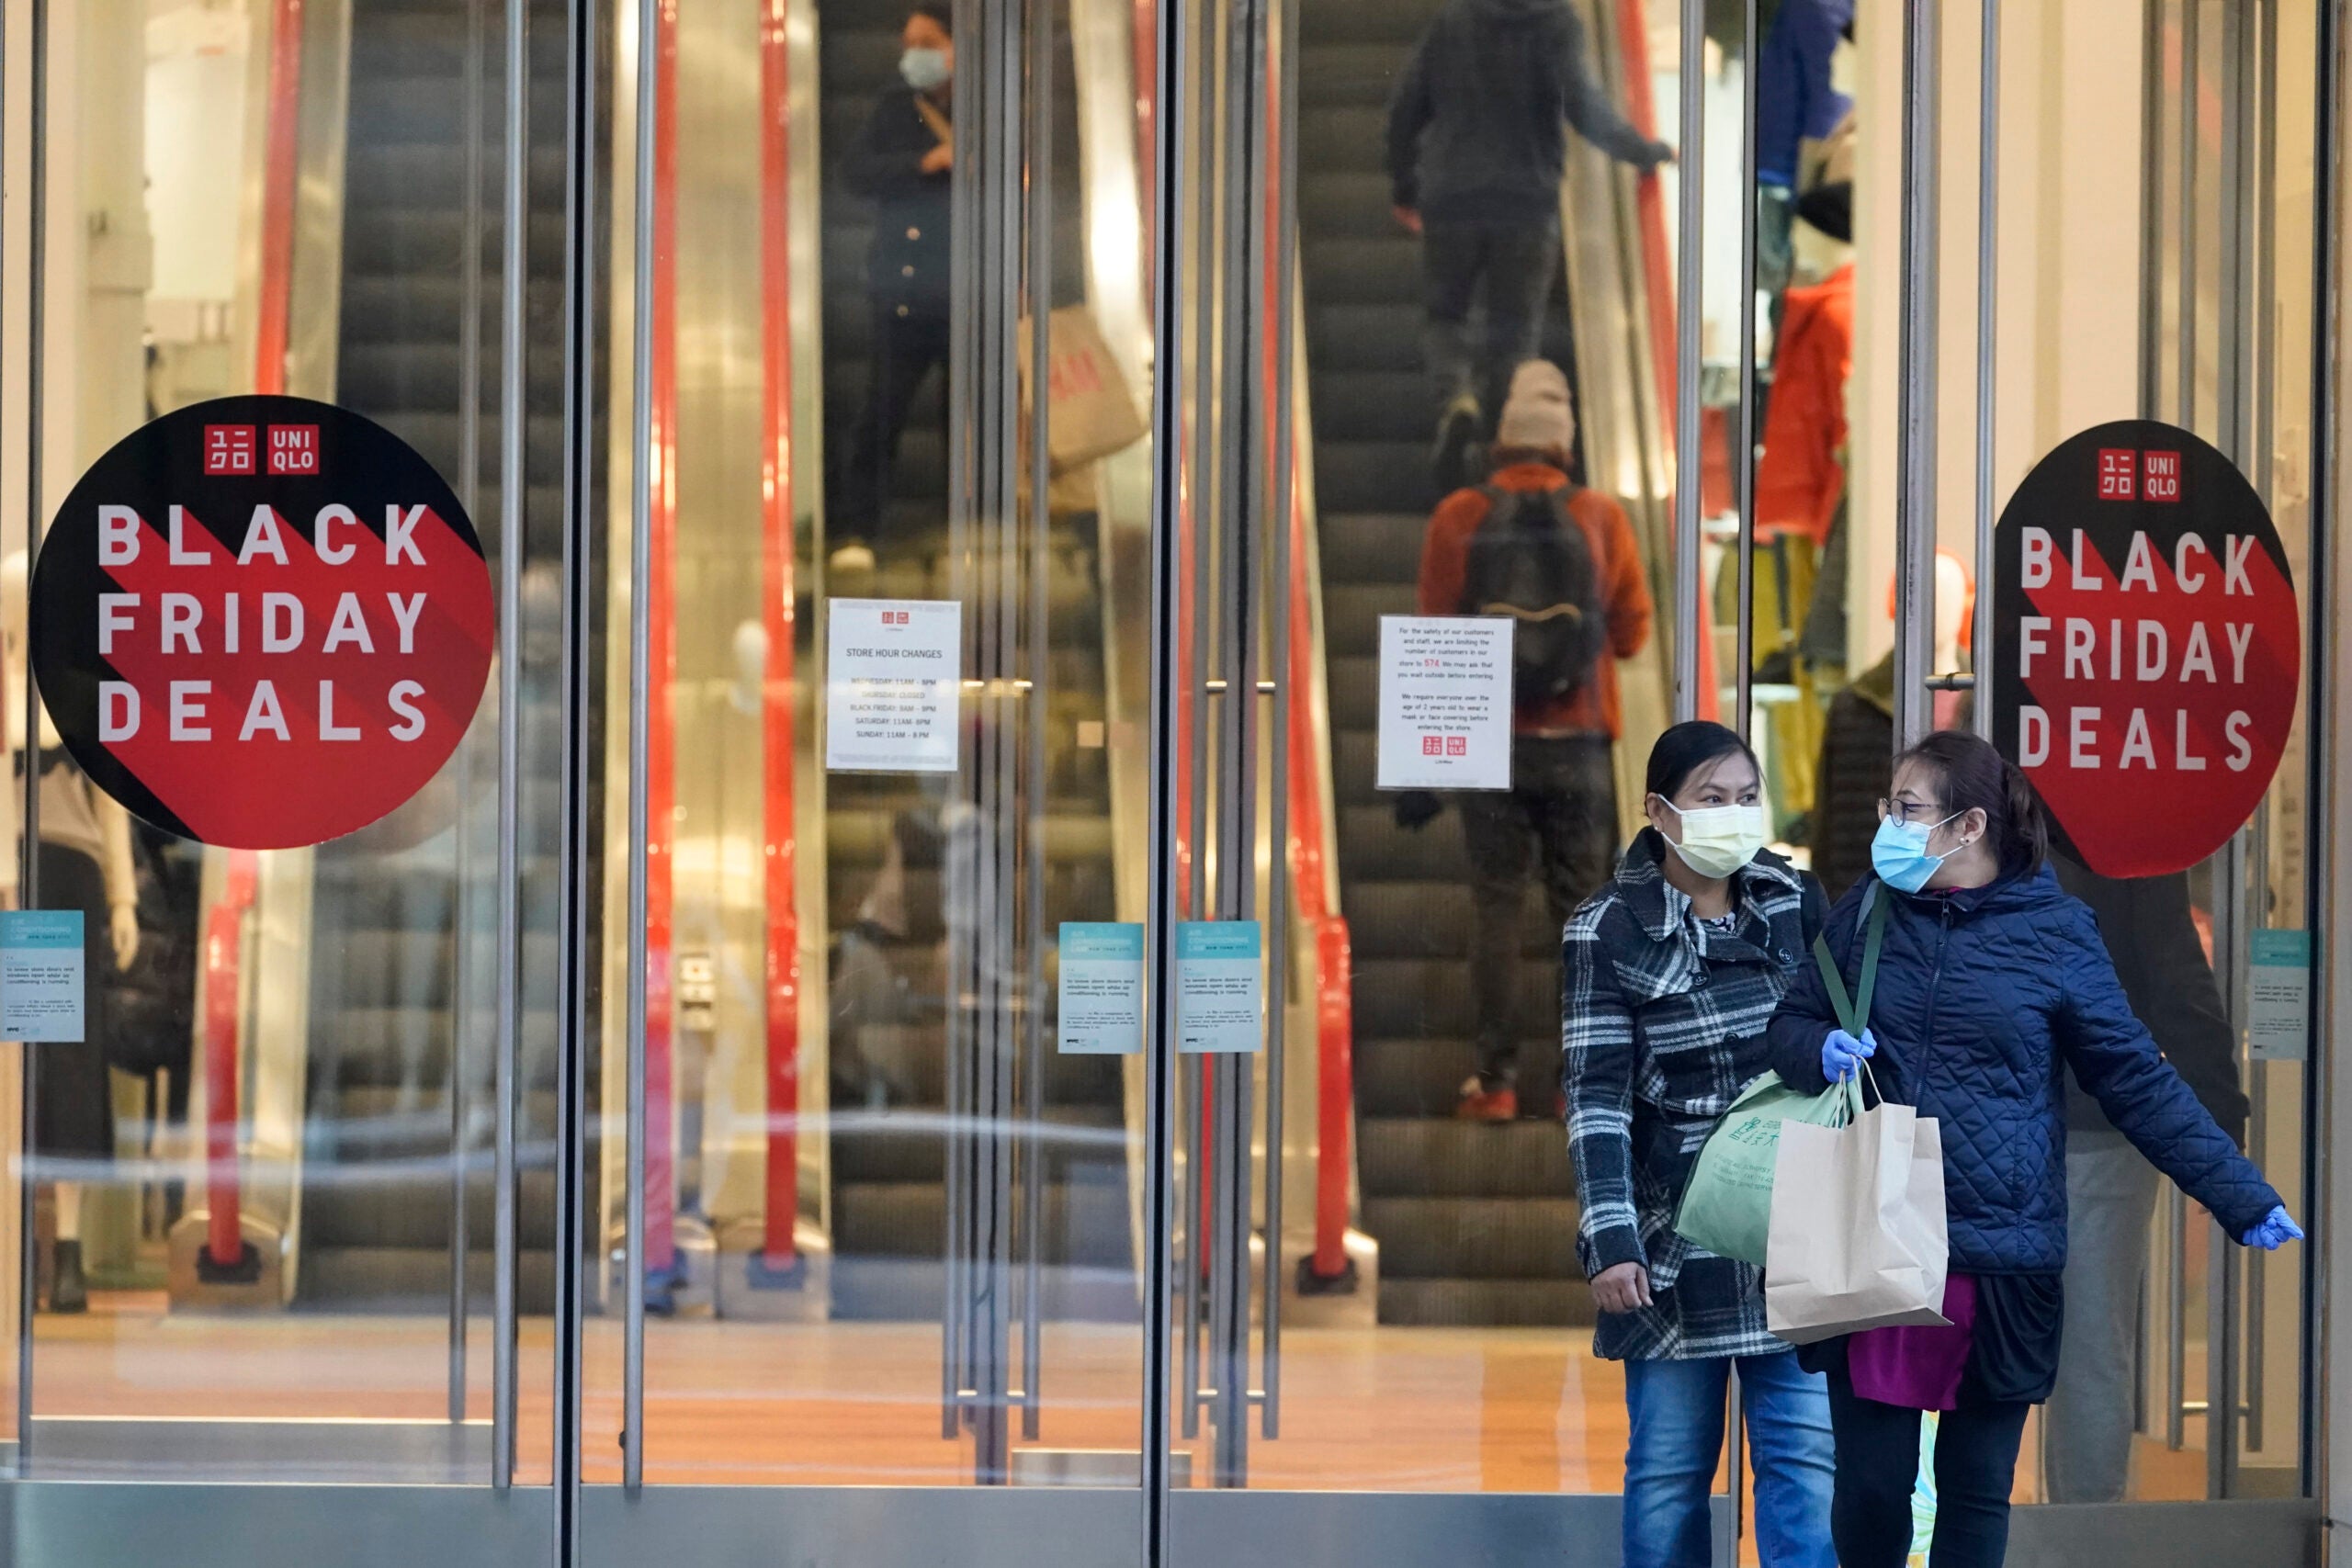 Black Friday Online Sales Hit New High After Shoppers Snag Big Discounts